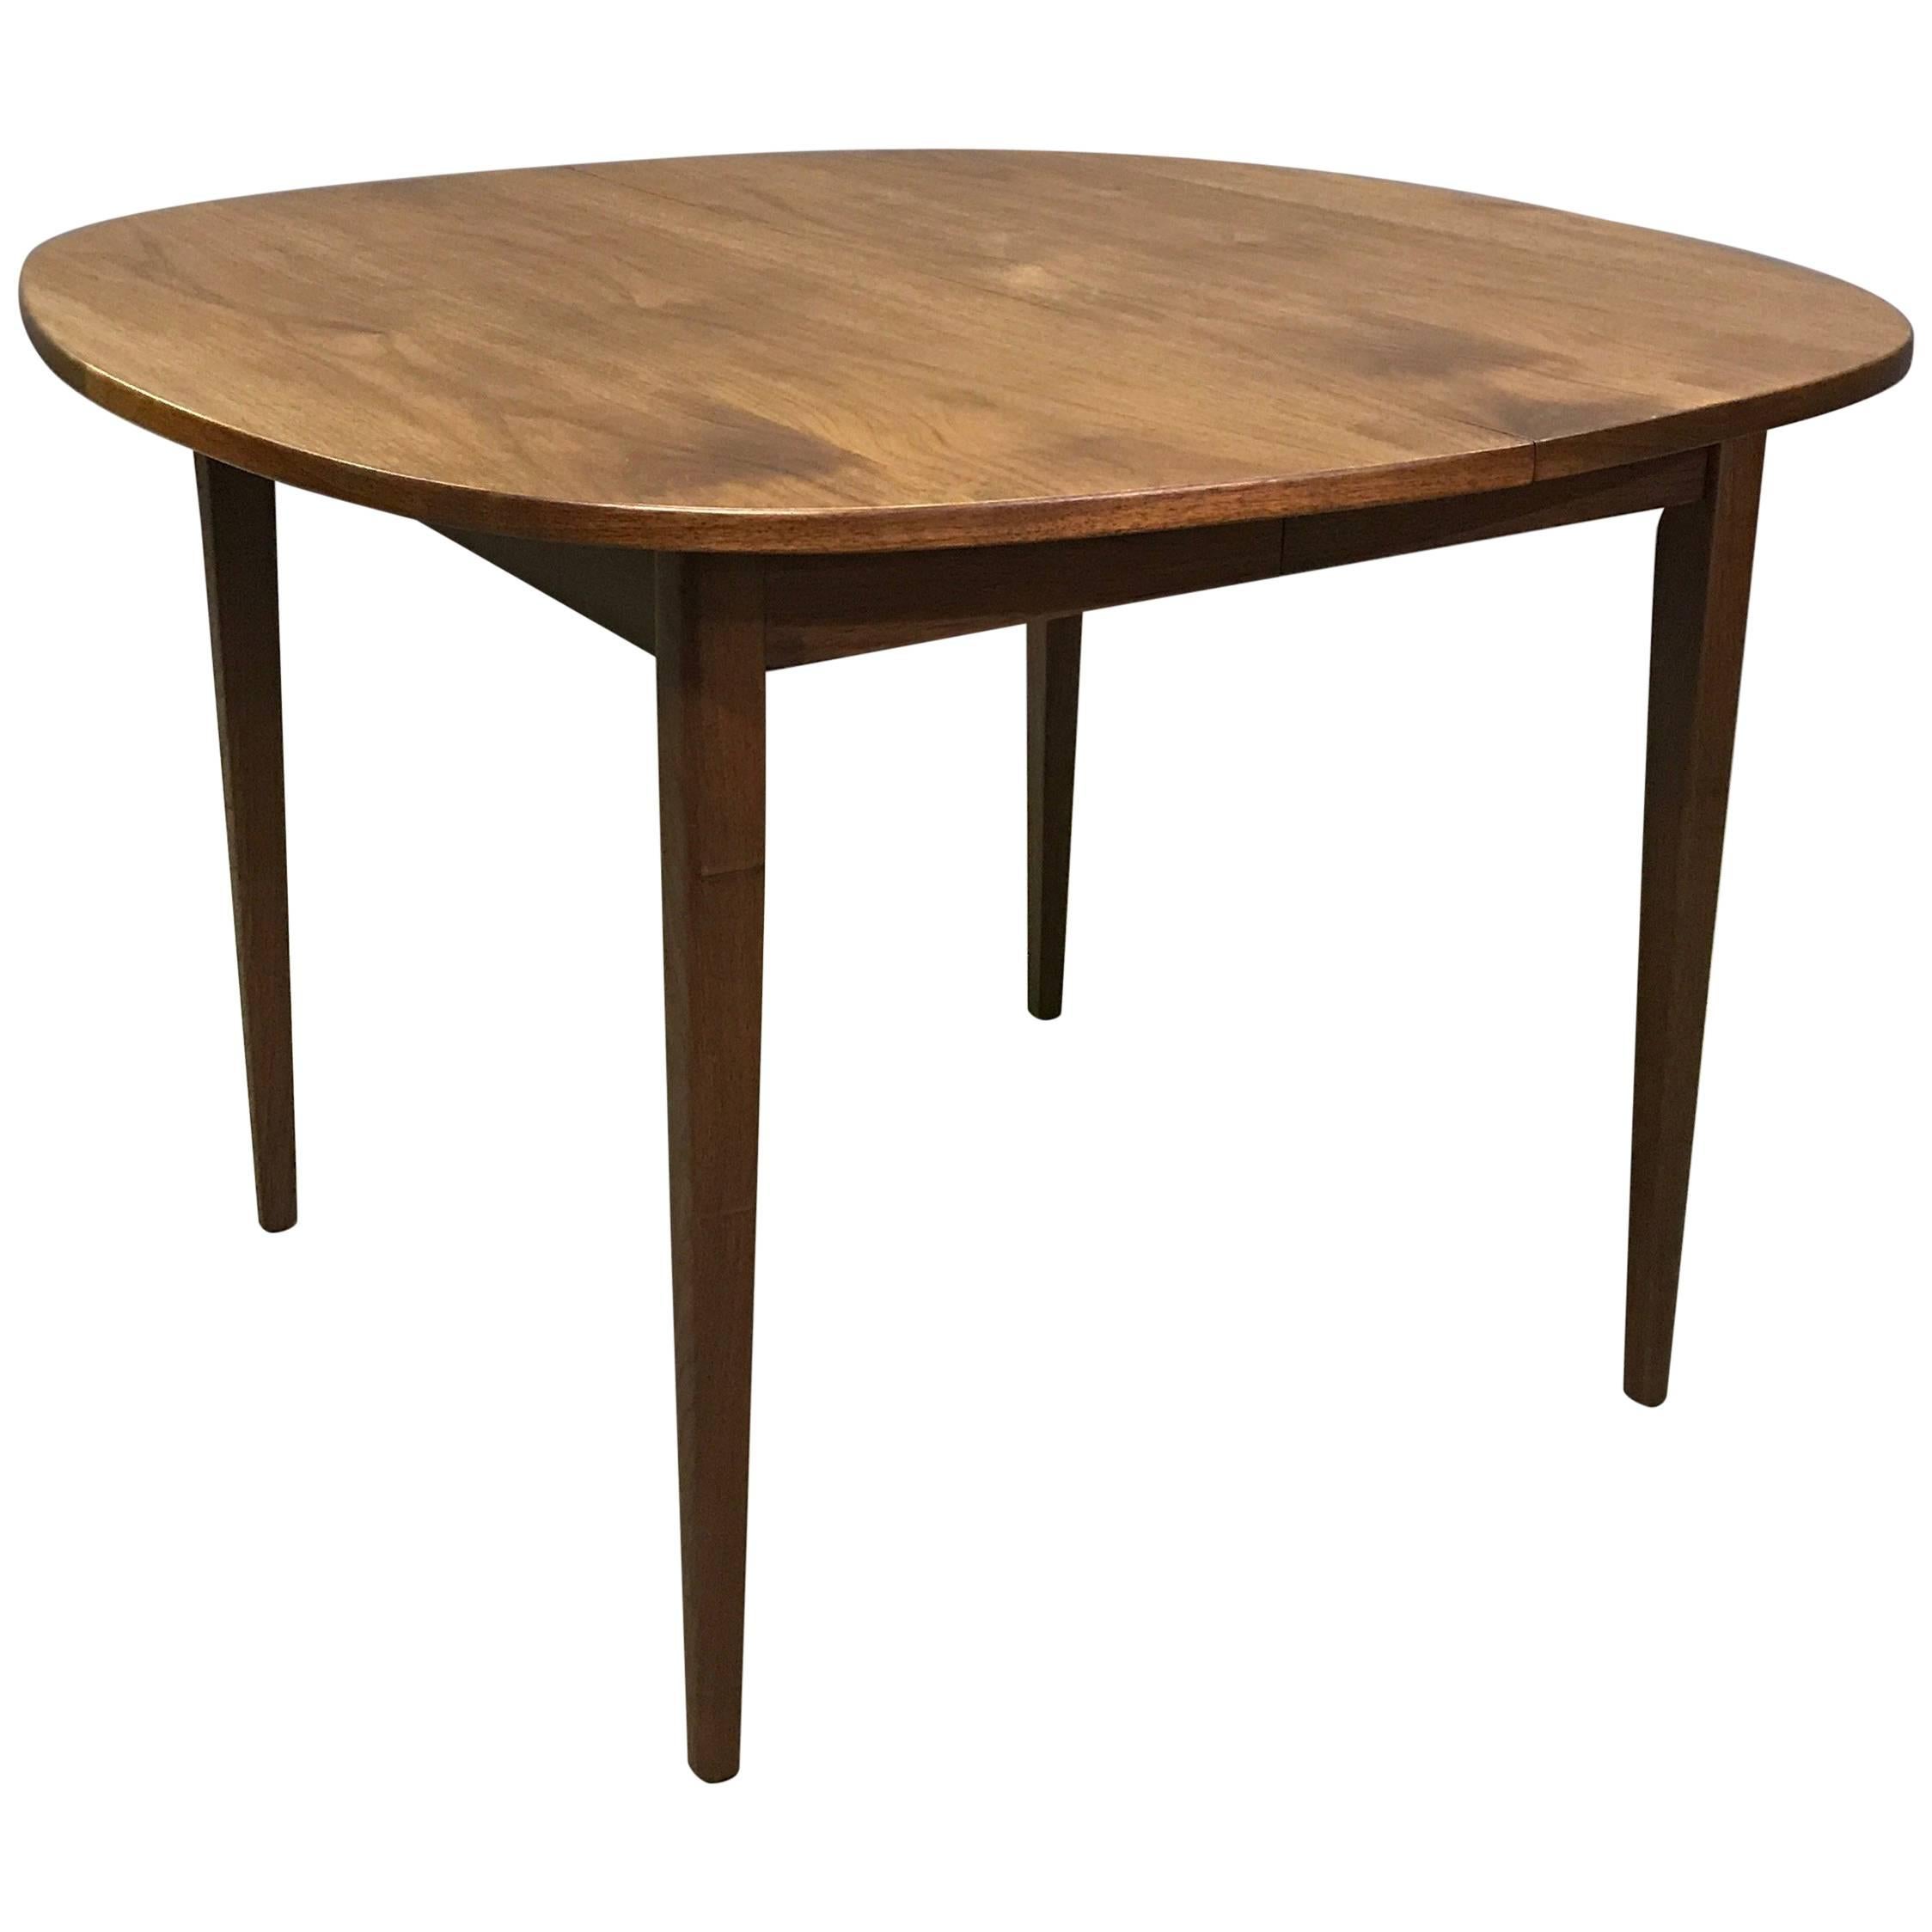 Mid-Century Modern Rounded Walnut Dining Table